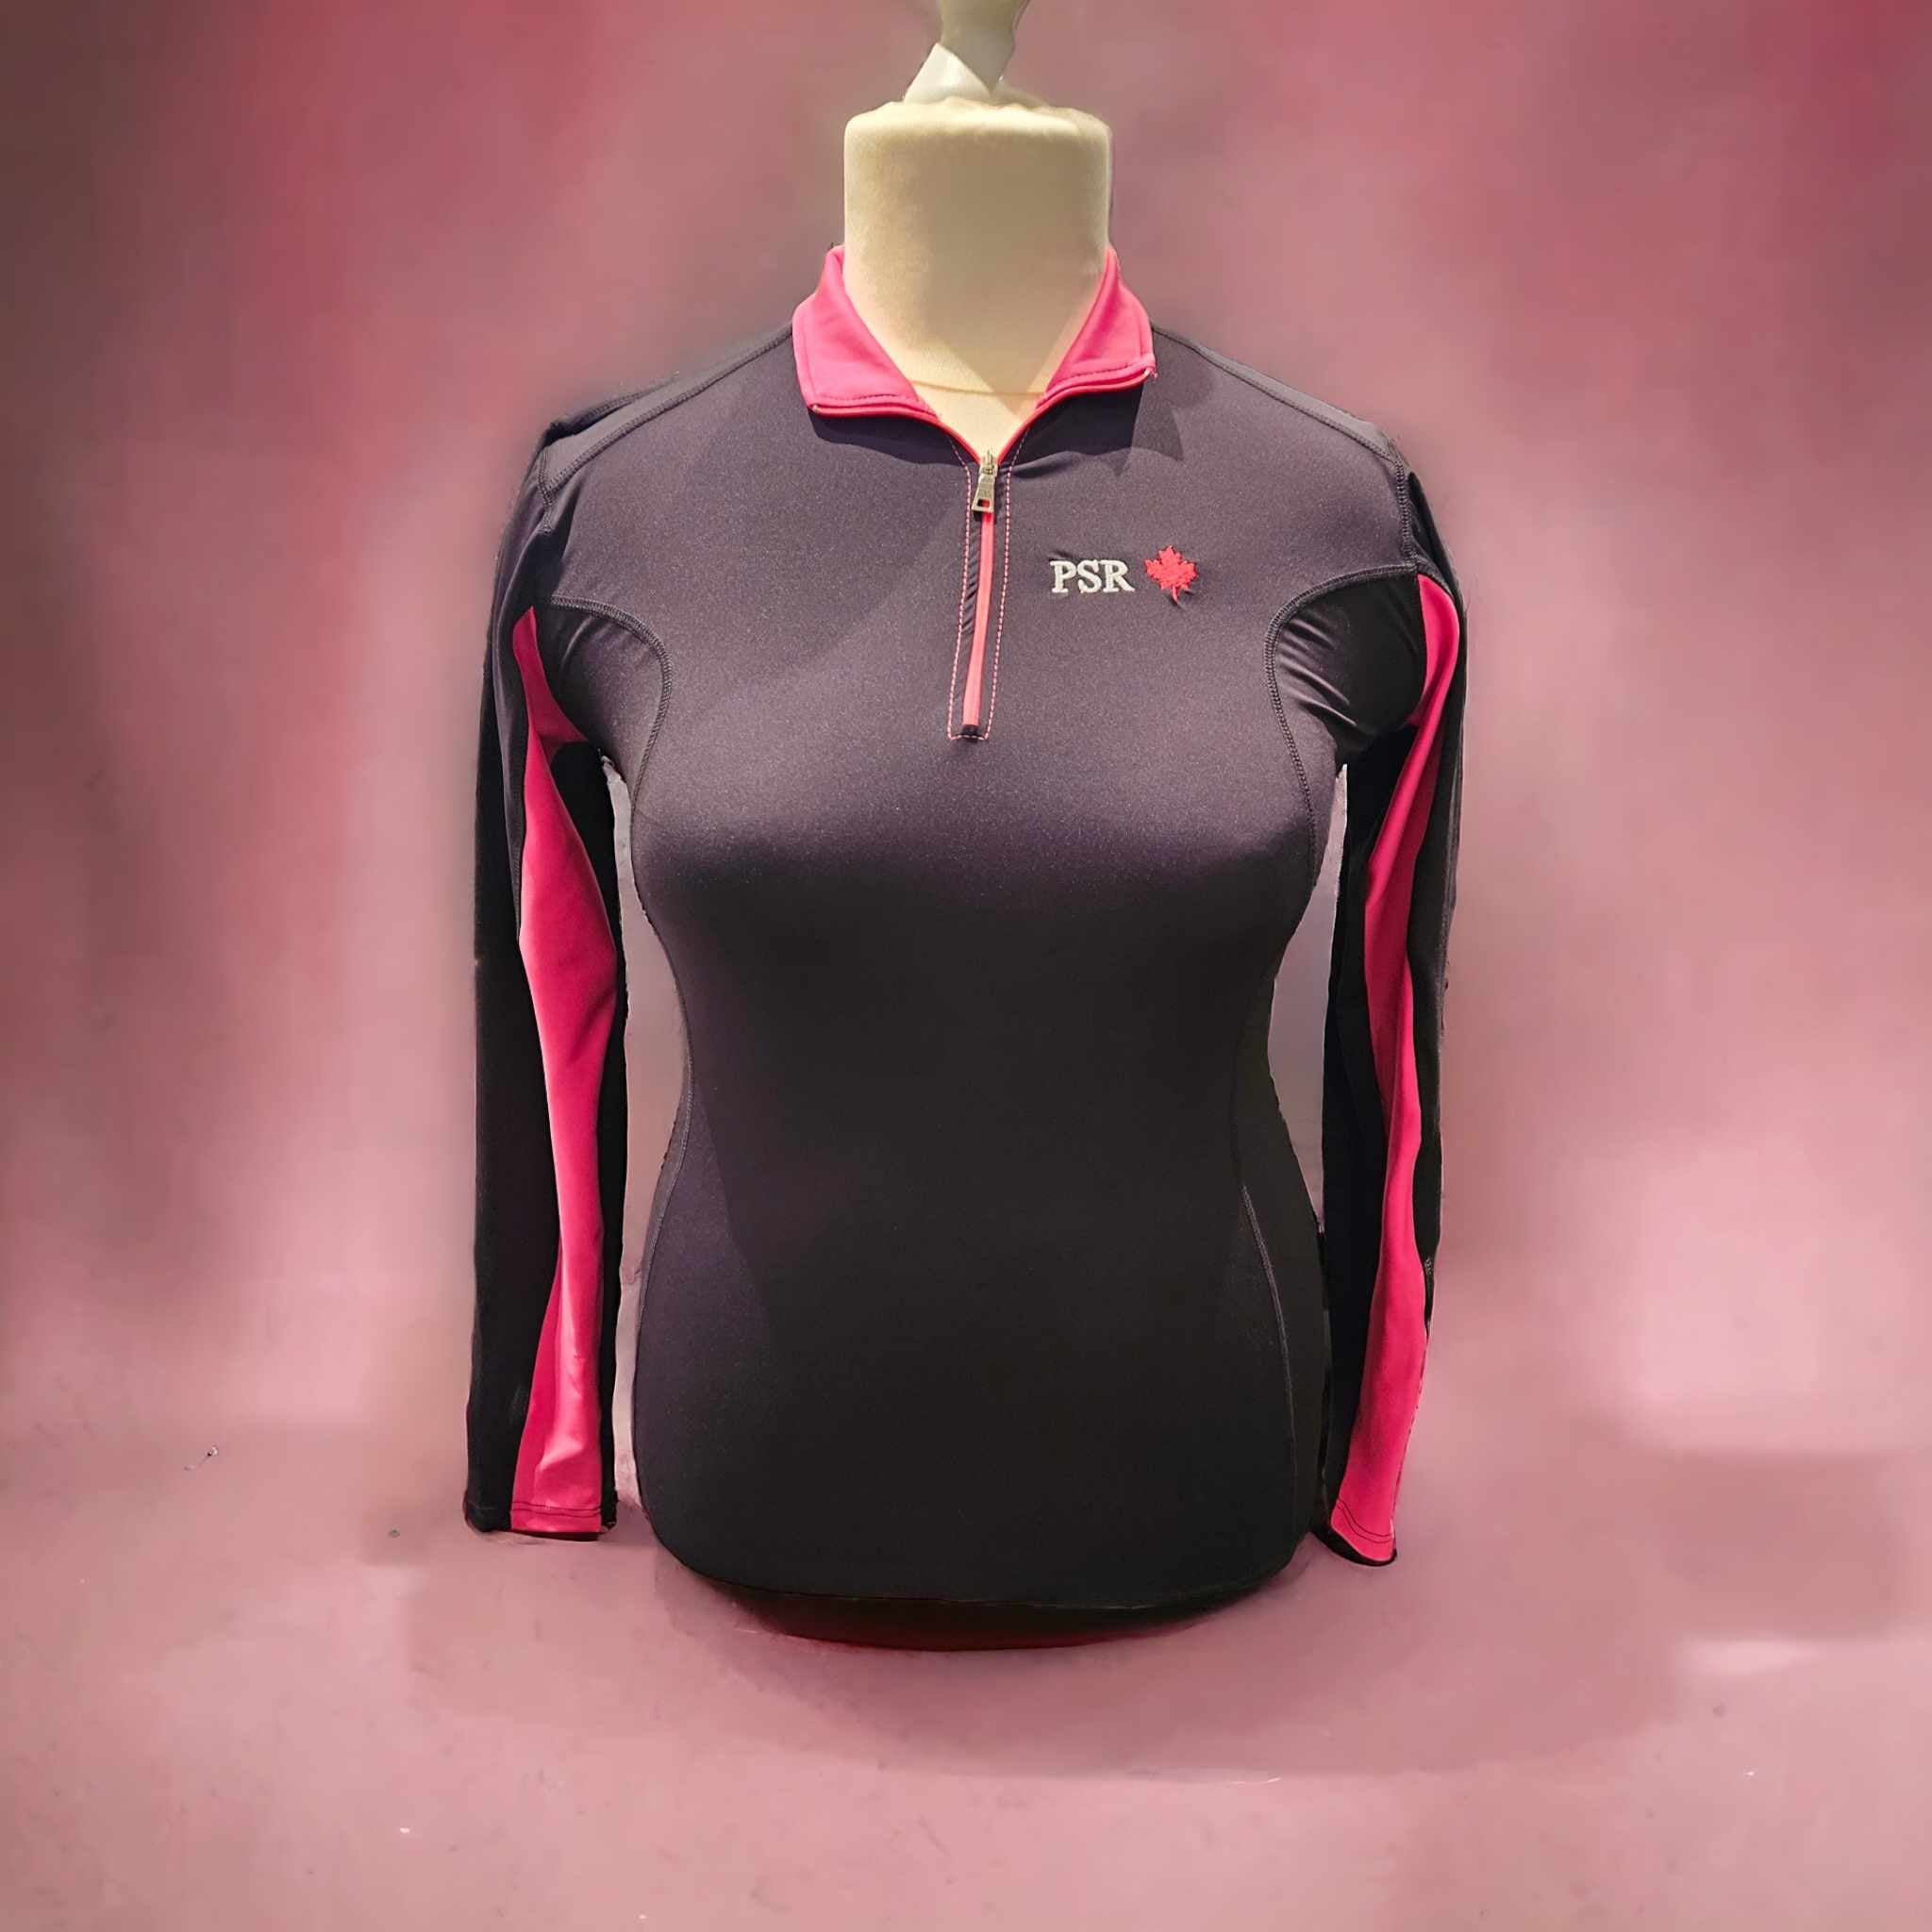 Prototype Black and pink Performance shirt